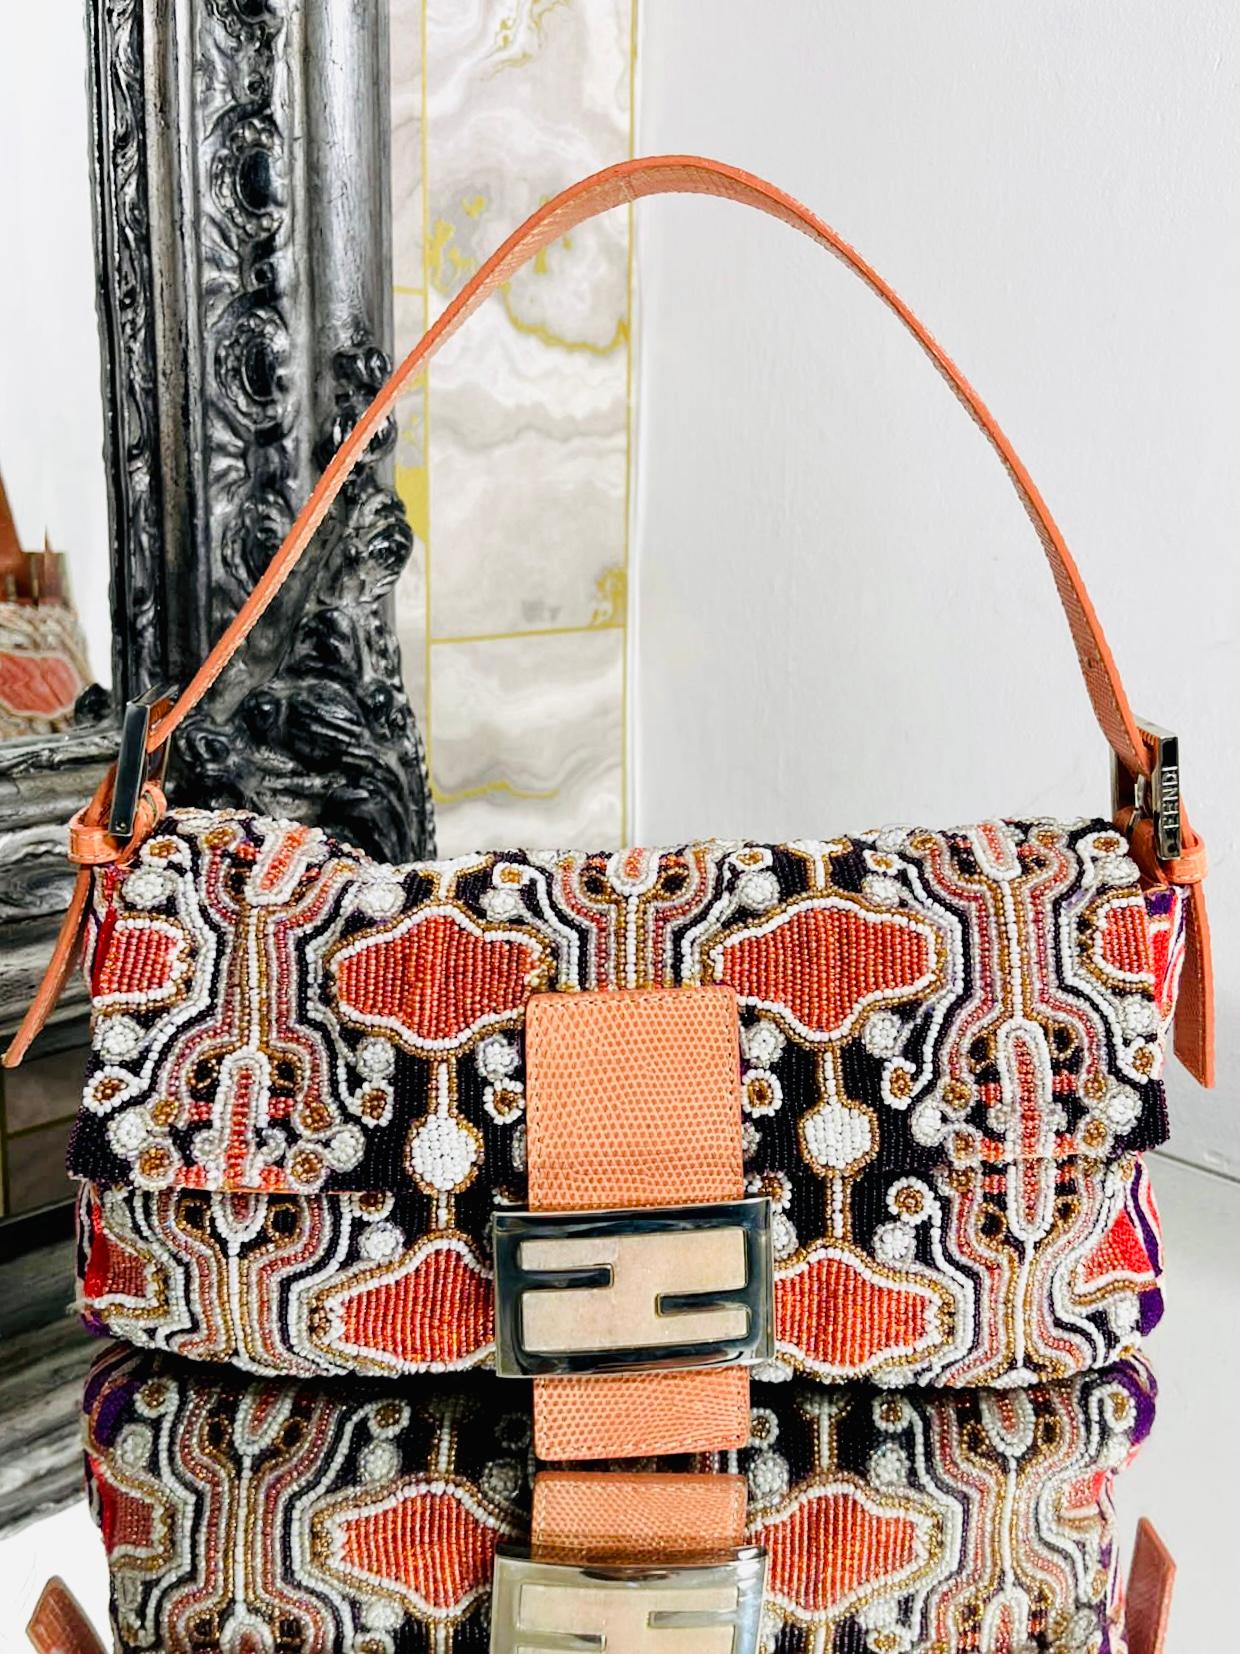 Fendi Beaded & Lizard Skin Baguette Bag

From the 190's  is this rare bag which is fully adorned with orange, black and white  beading. Flap front with magnetic closure and peach toned lizard skink accents and

strap. Silver hardware.

Size - Height